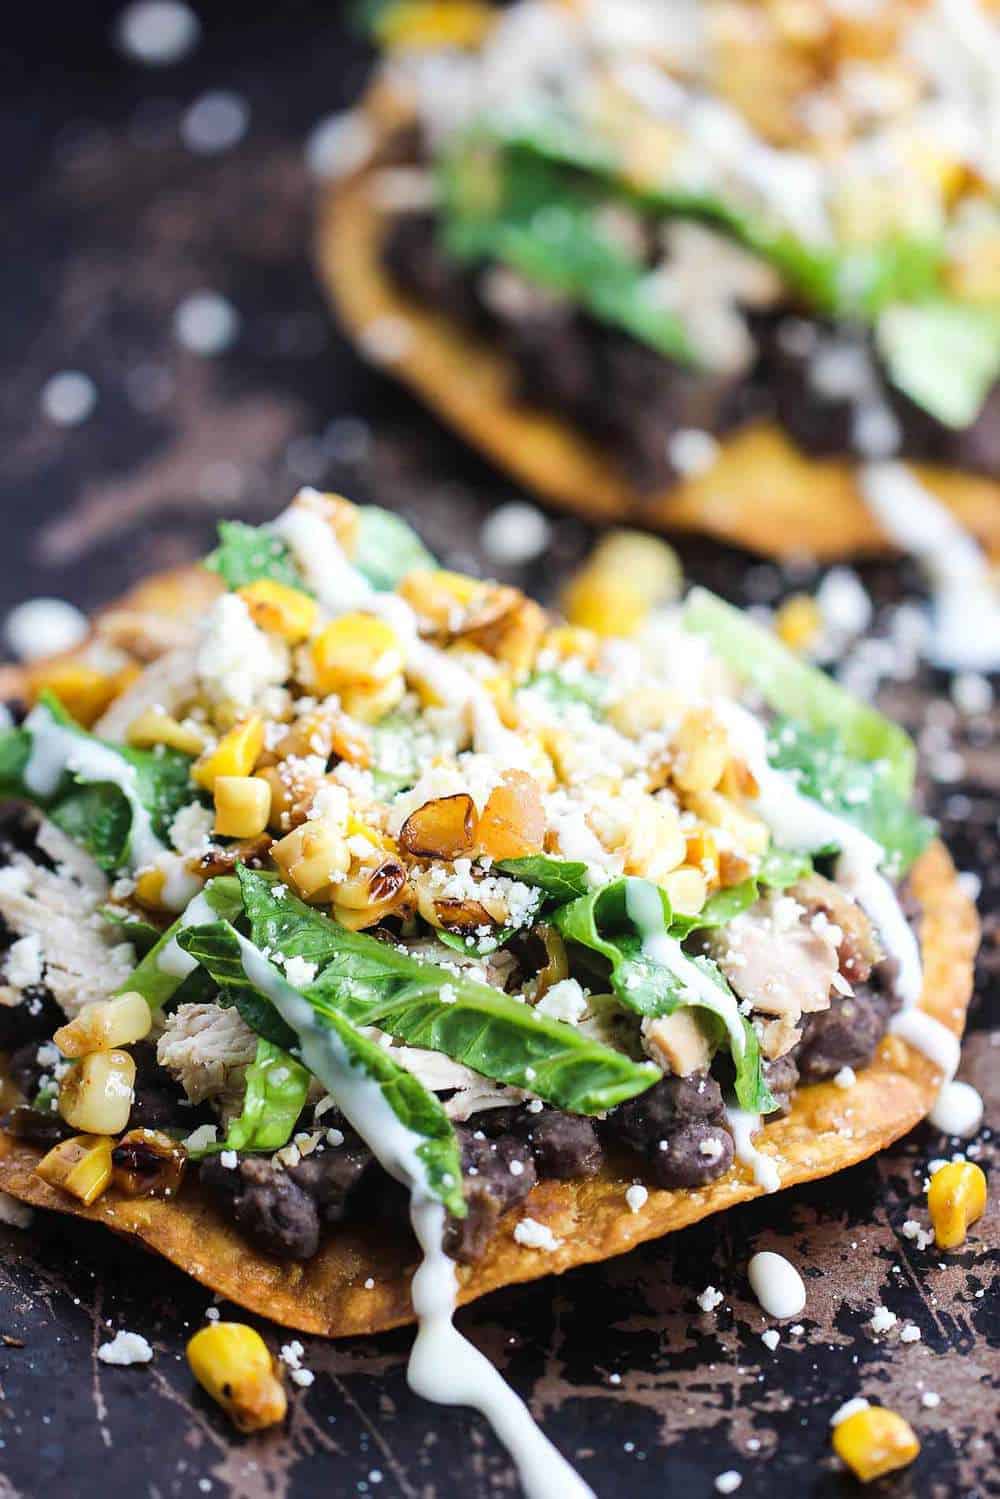 Black Bean and Roasted Chicken Tostada recipe